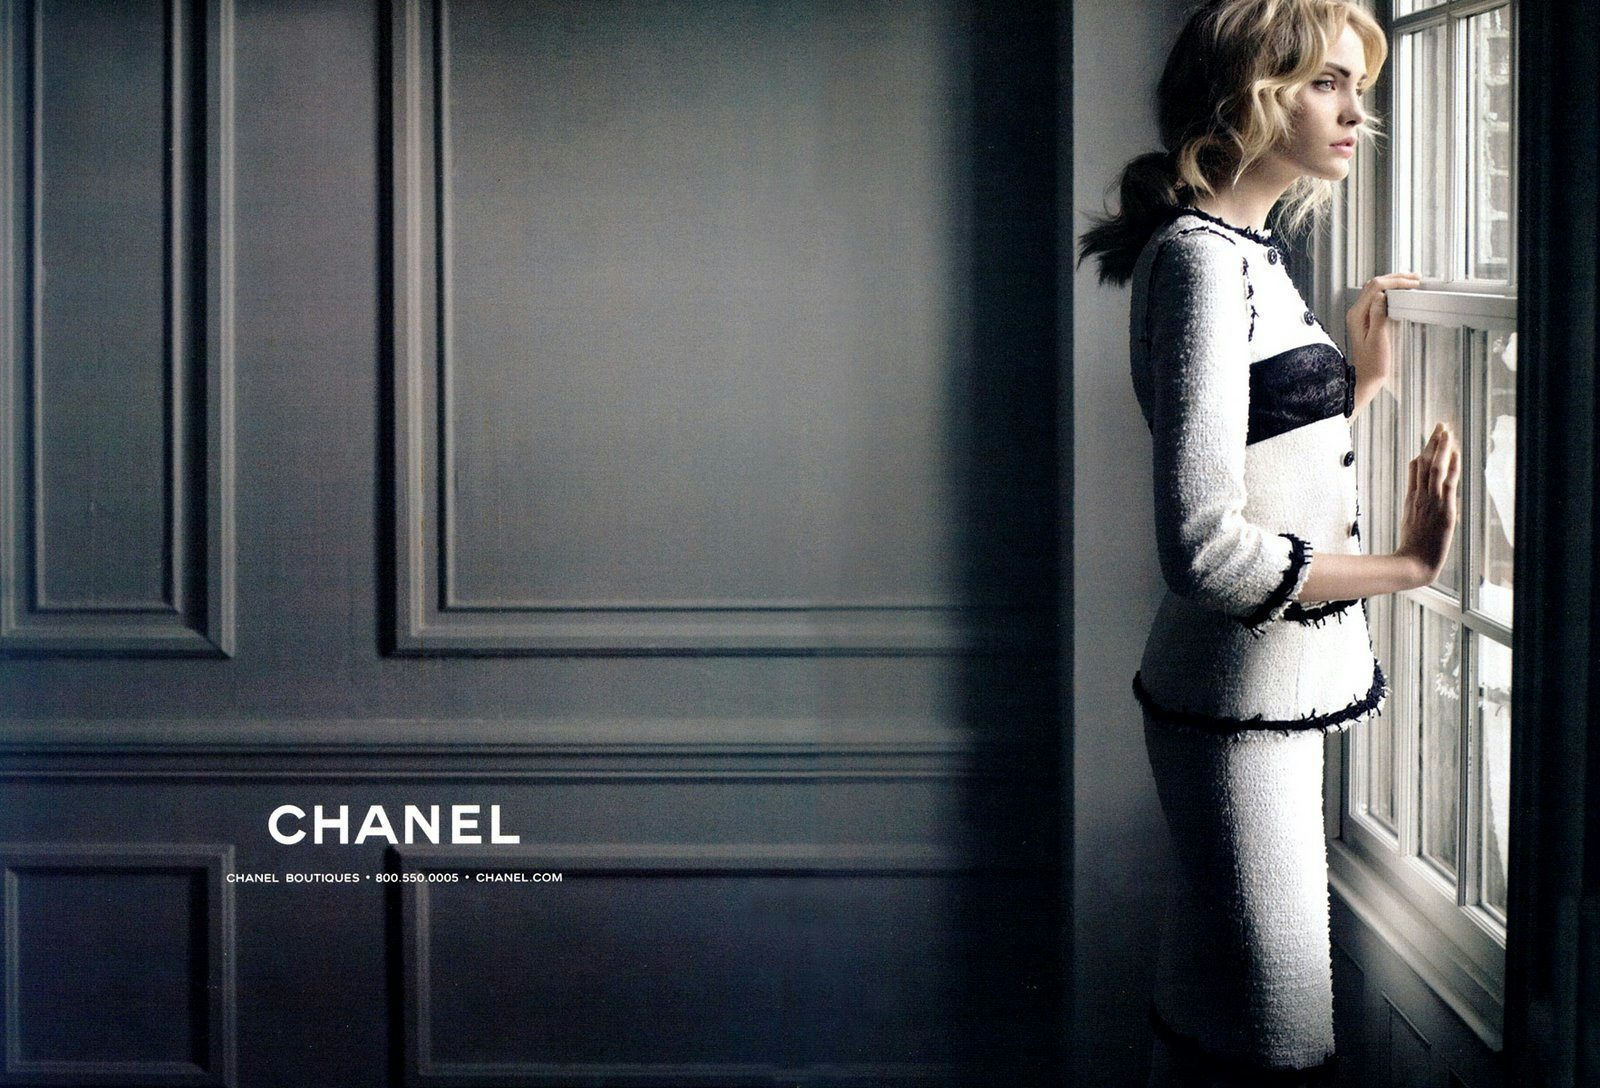 Chanel: 'Digital should not be a